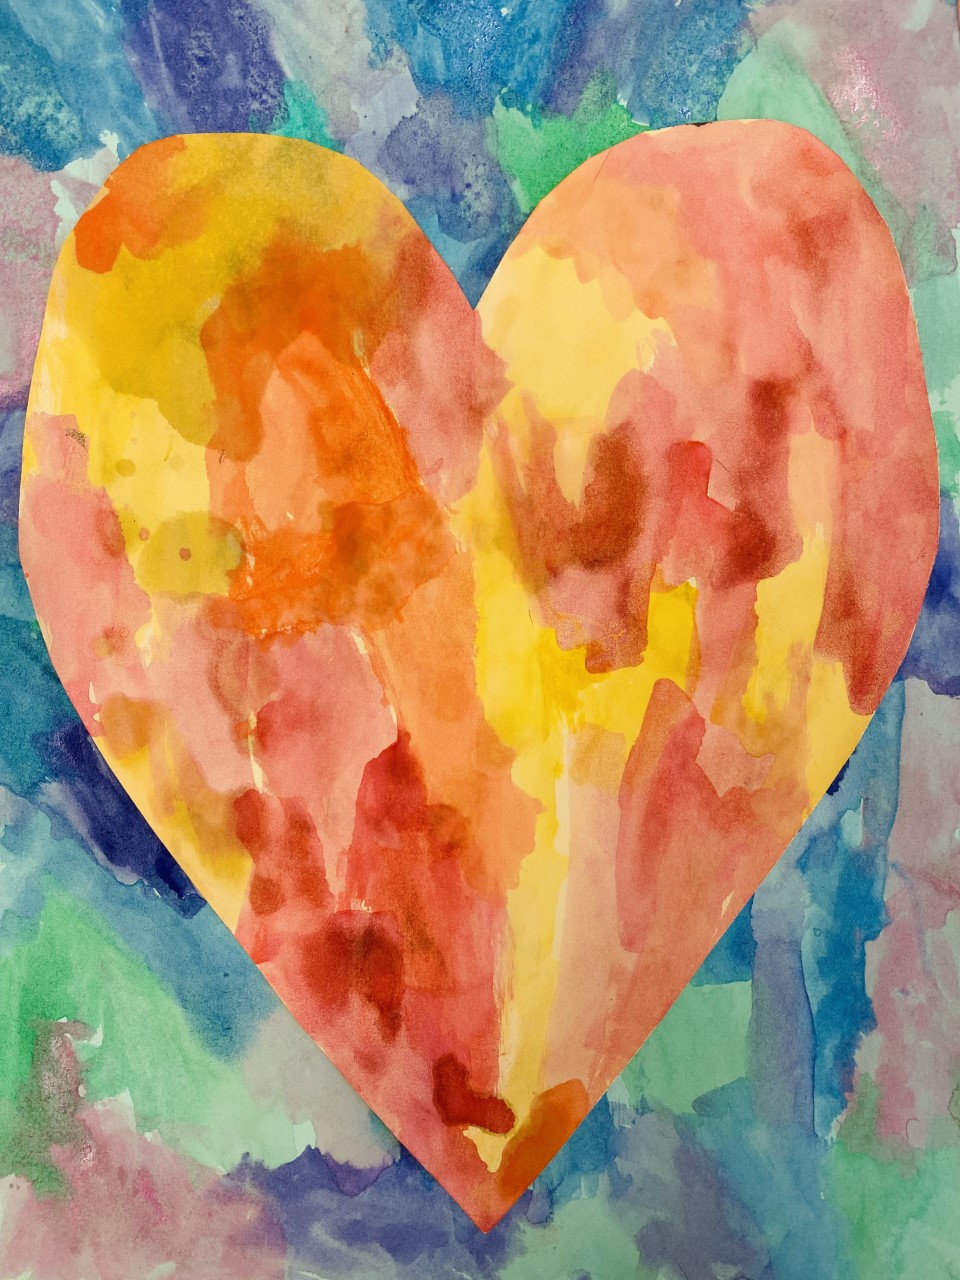 Mosaic style watercolor of a heart